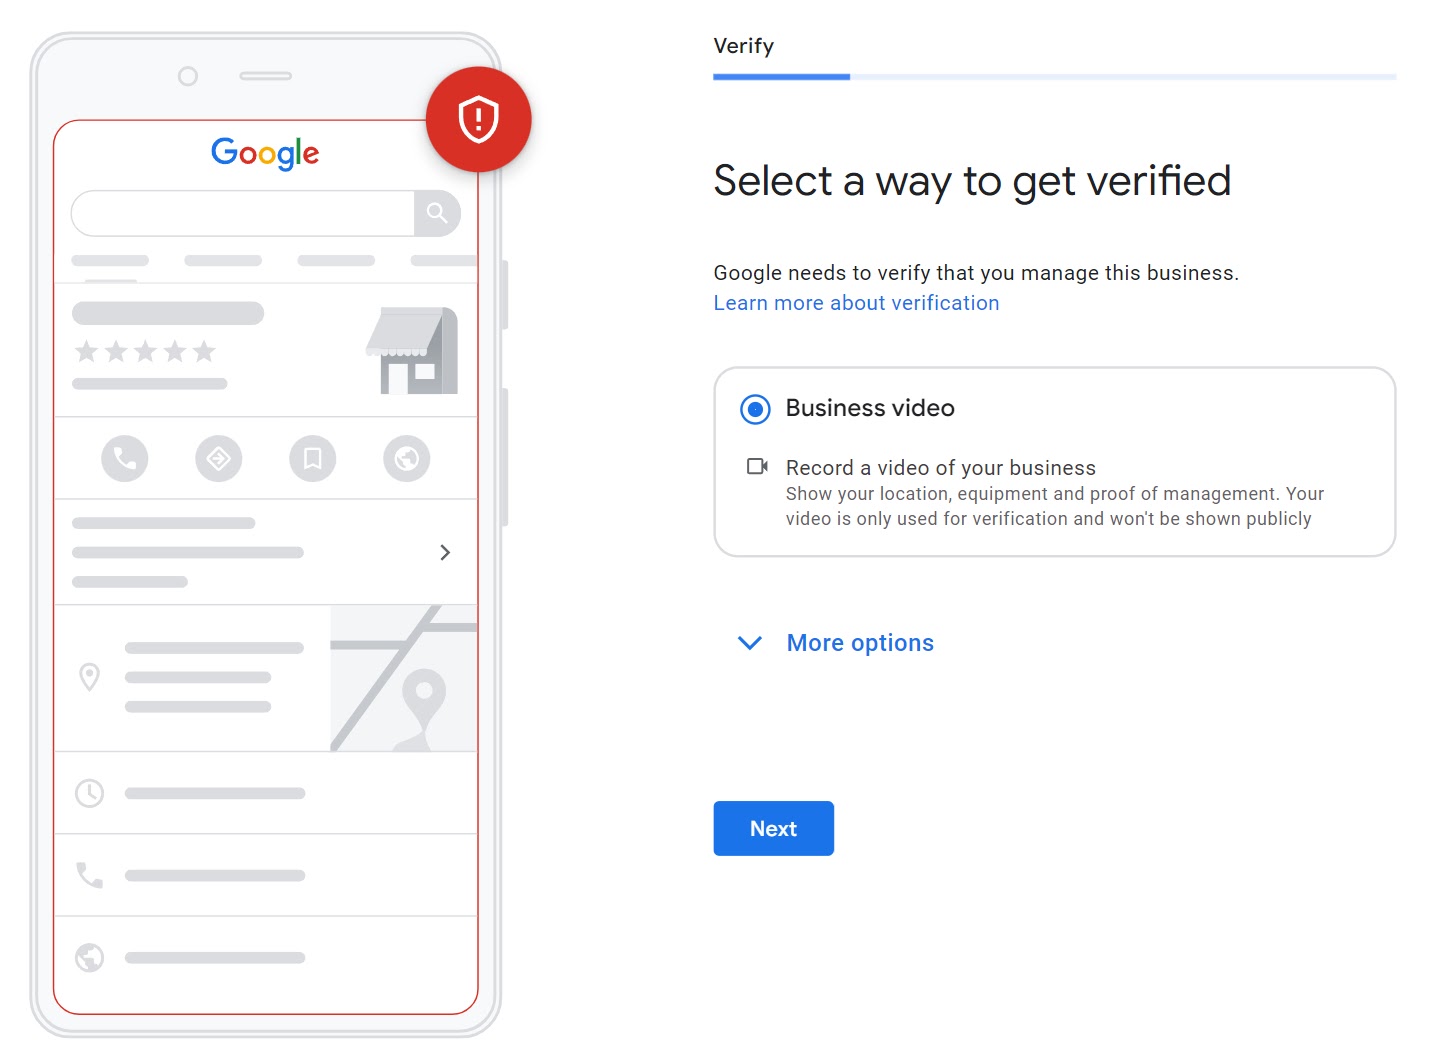 "Select a way to get verified" window in setting up GBP